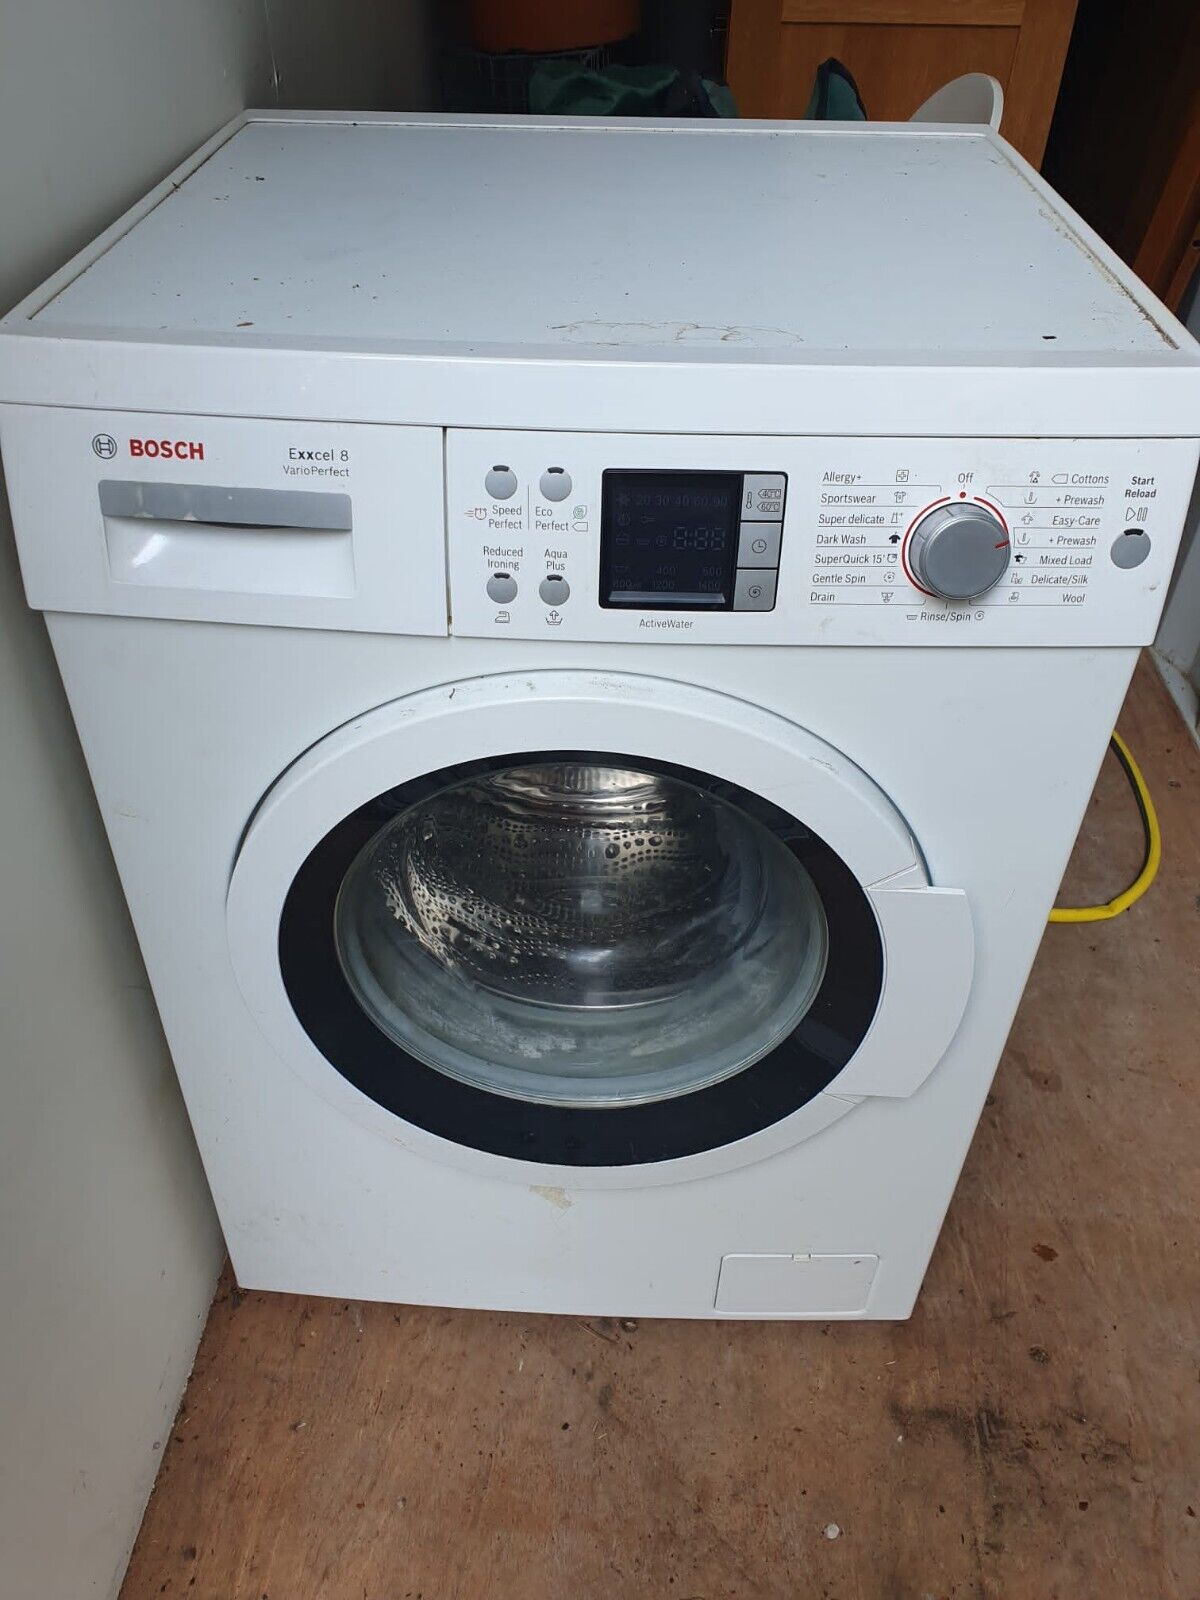 Bosch Washing Machine Excell 8 Varioperfect - Excellent condition 